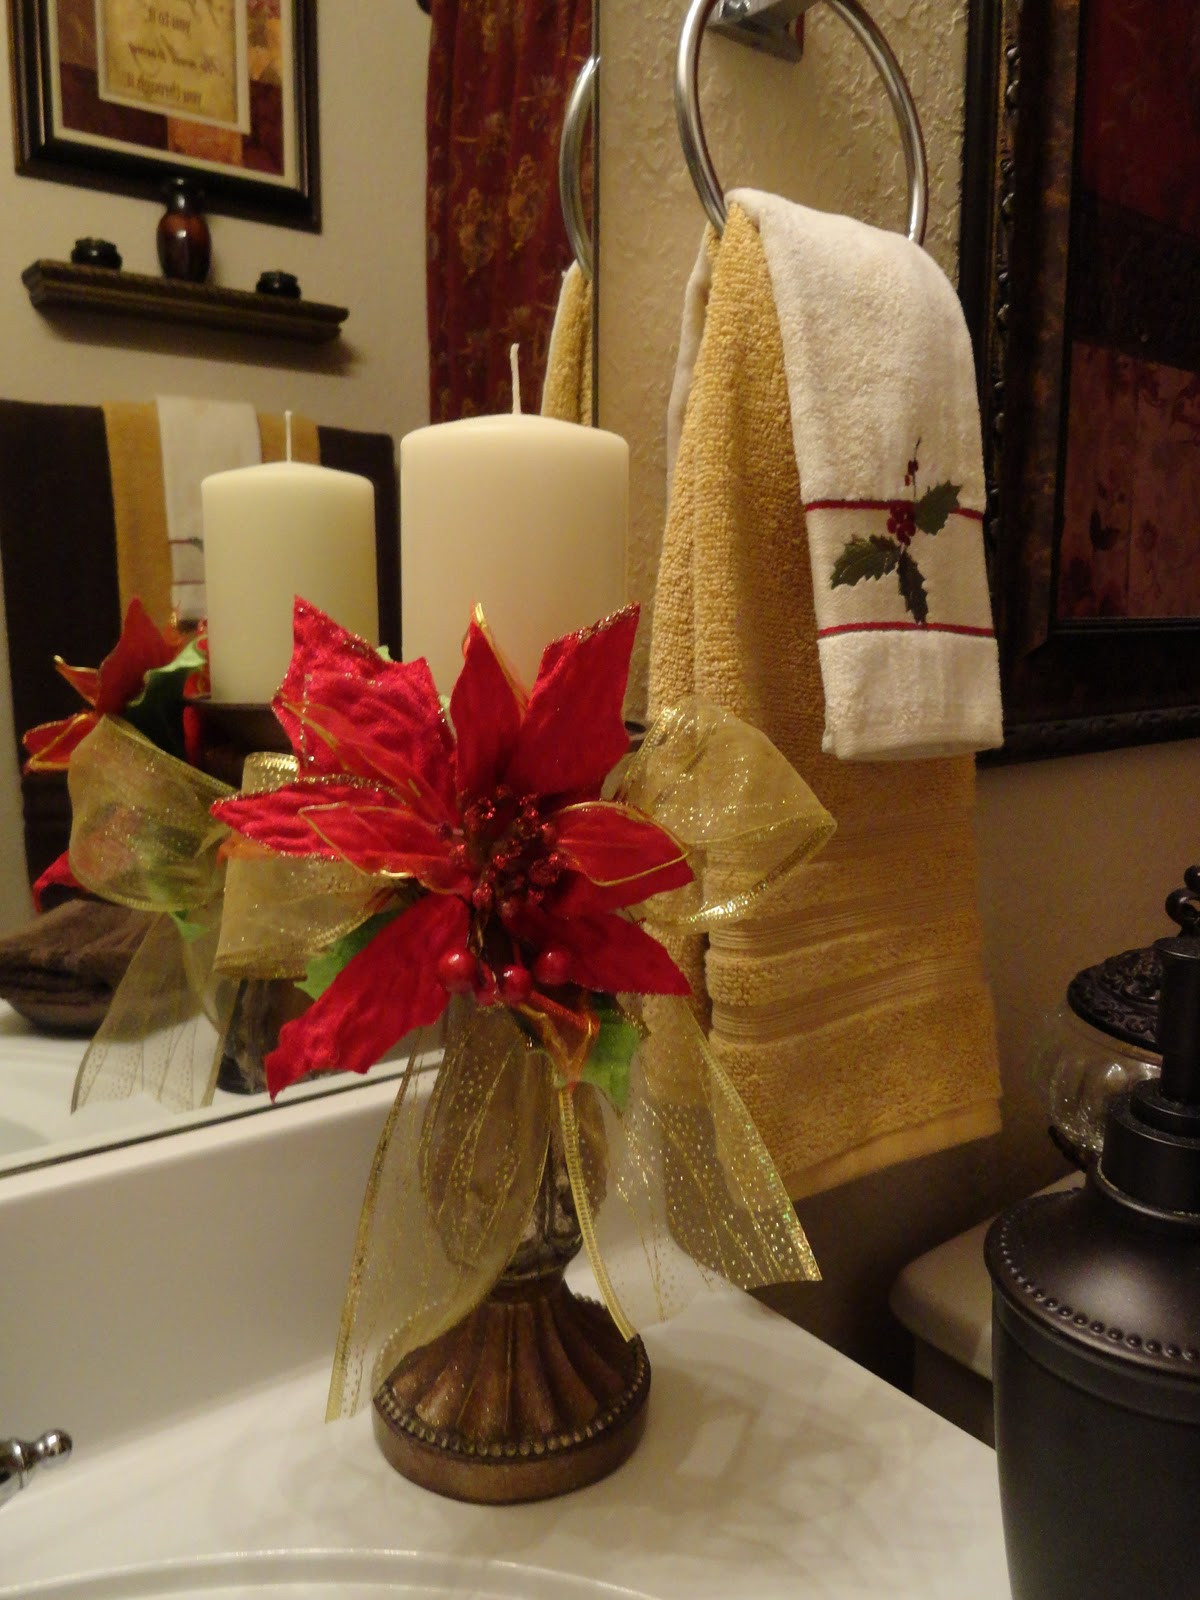 Christmas Bathroom Decor
 Our Home Away From Home A TOUCH OF CHRISTMAS IN THE GUEST